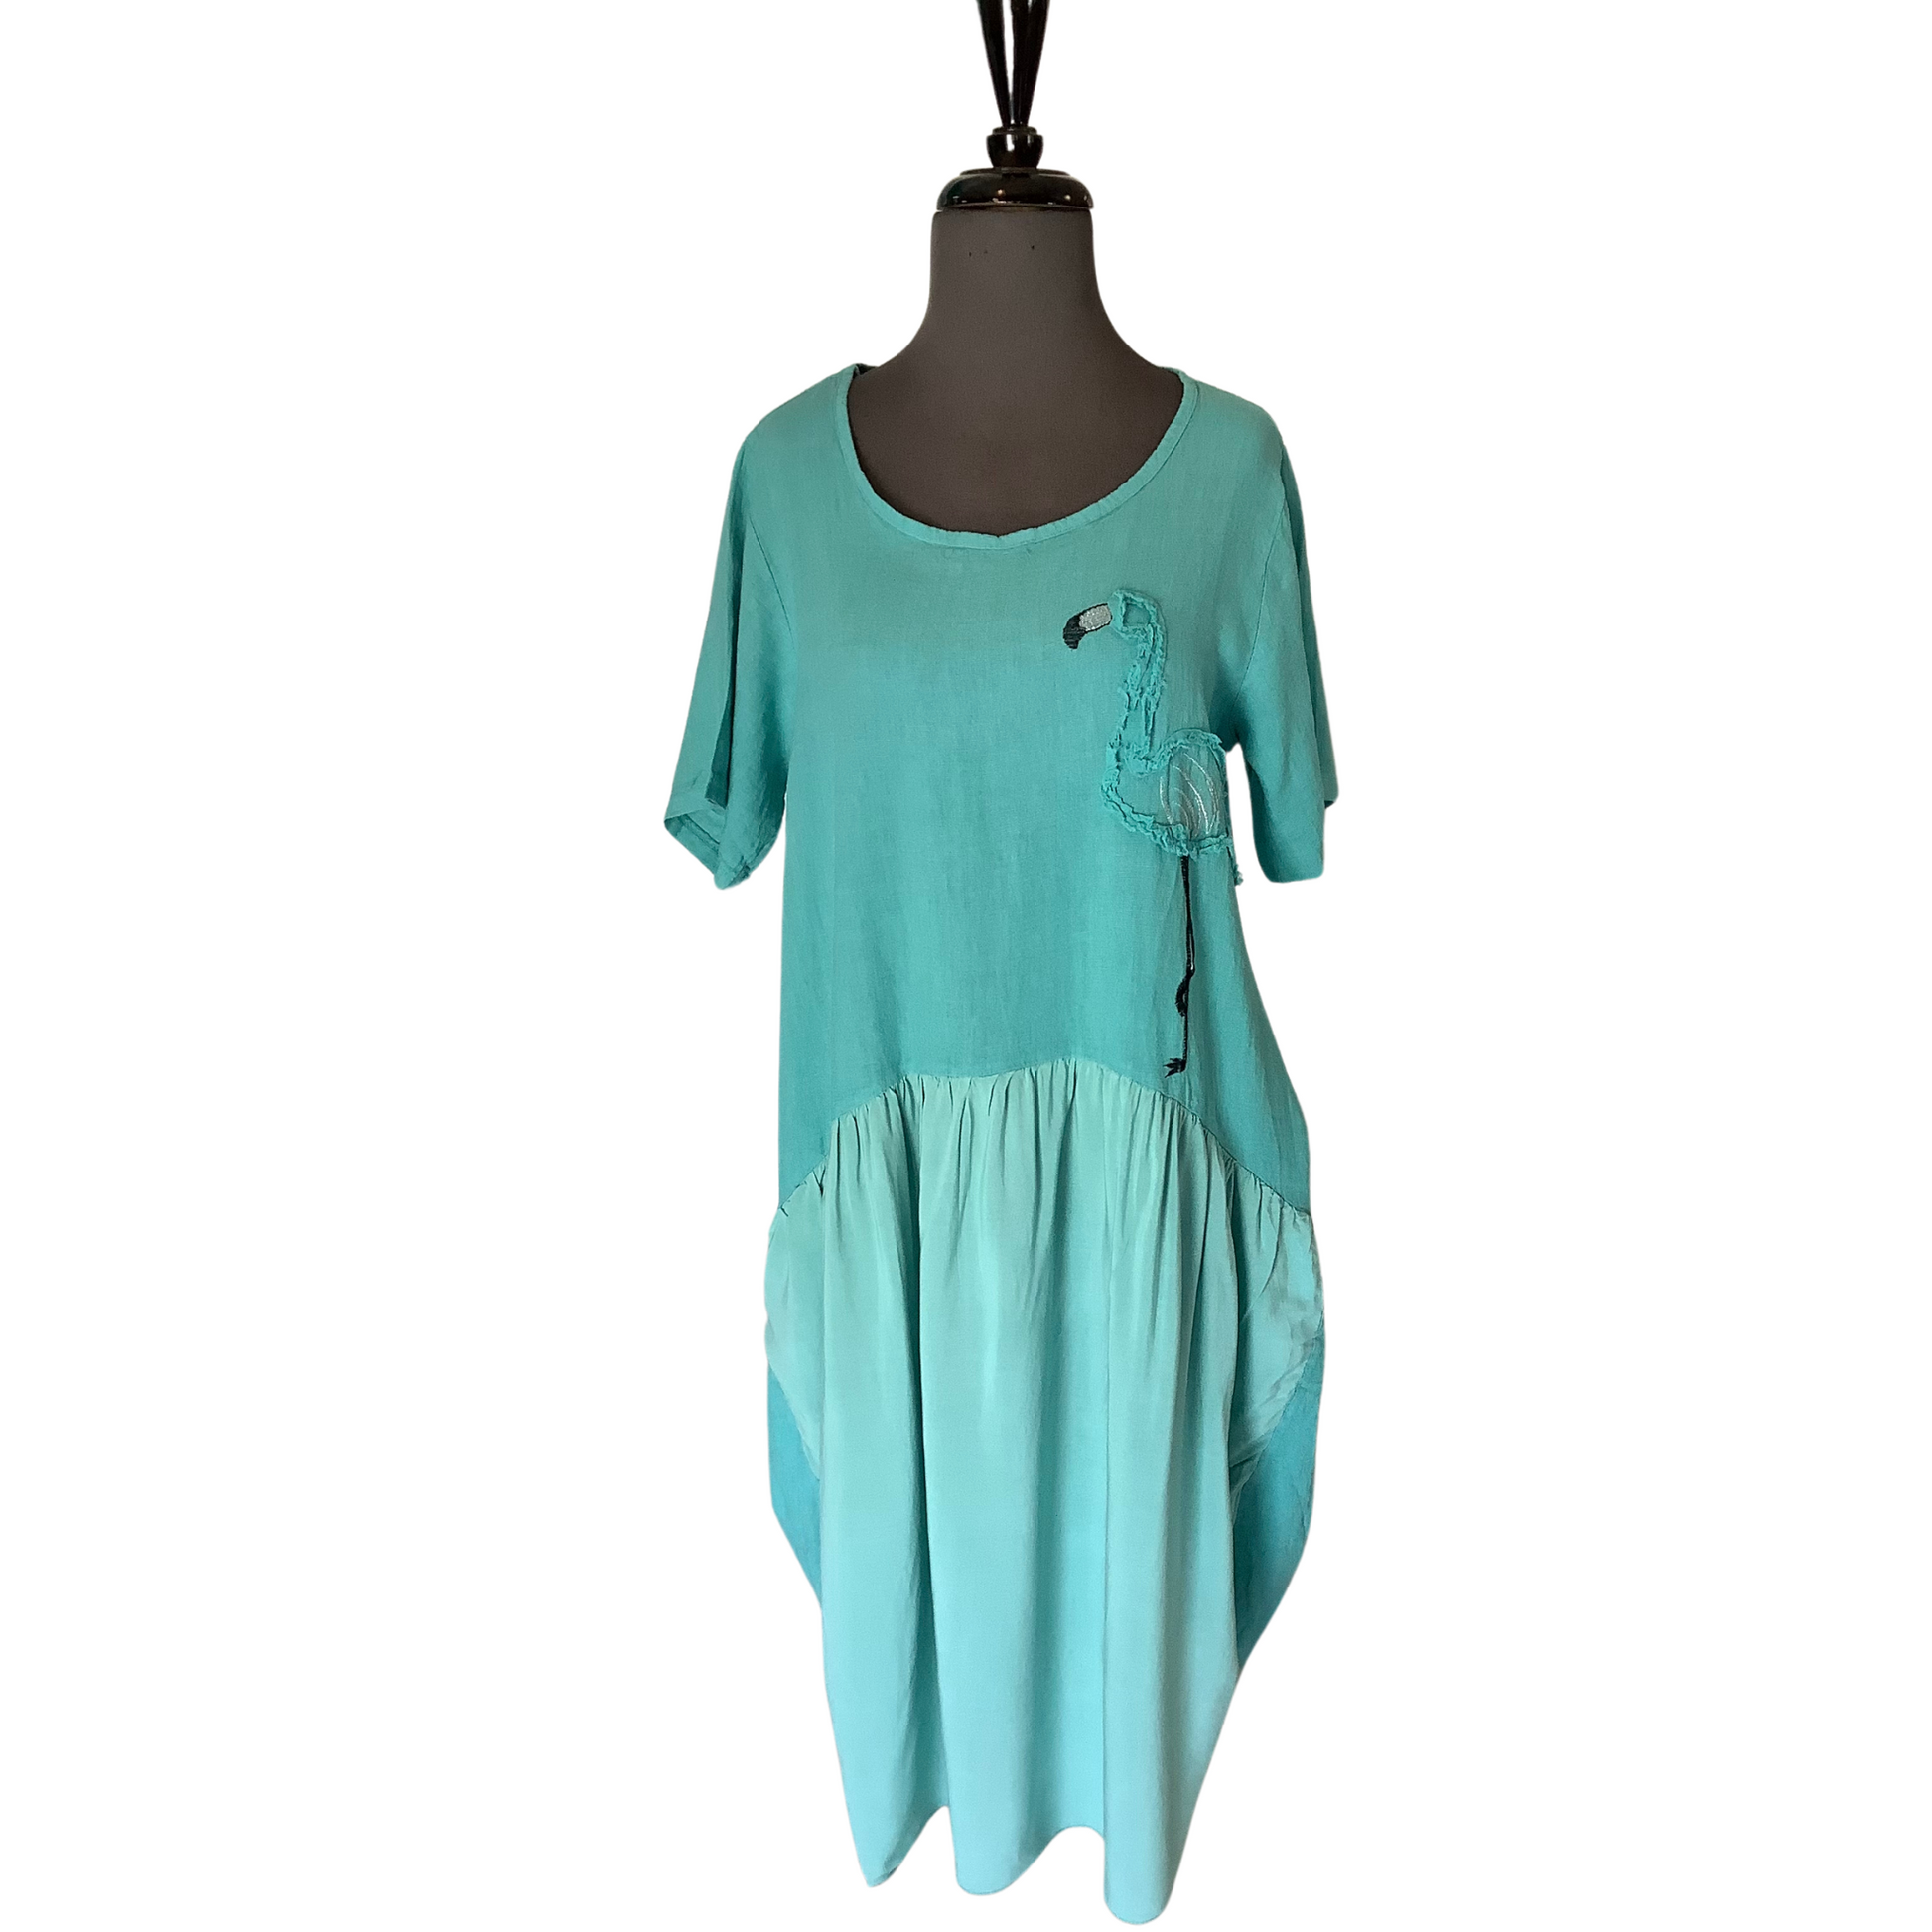 Our classic linens mixed with Flamingo design offer a unique and stylish look. This elegant dress features a maxi length with a gorgeous seafoam color and chic scoop neck. The short sleeves make this a perfect summer dress.